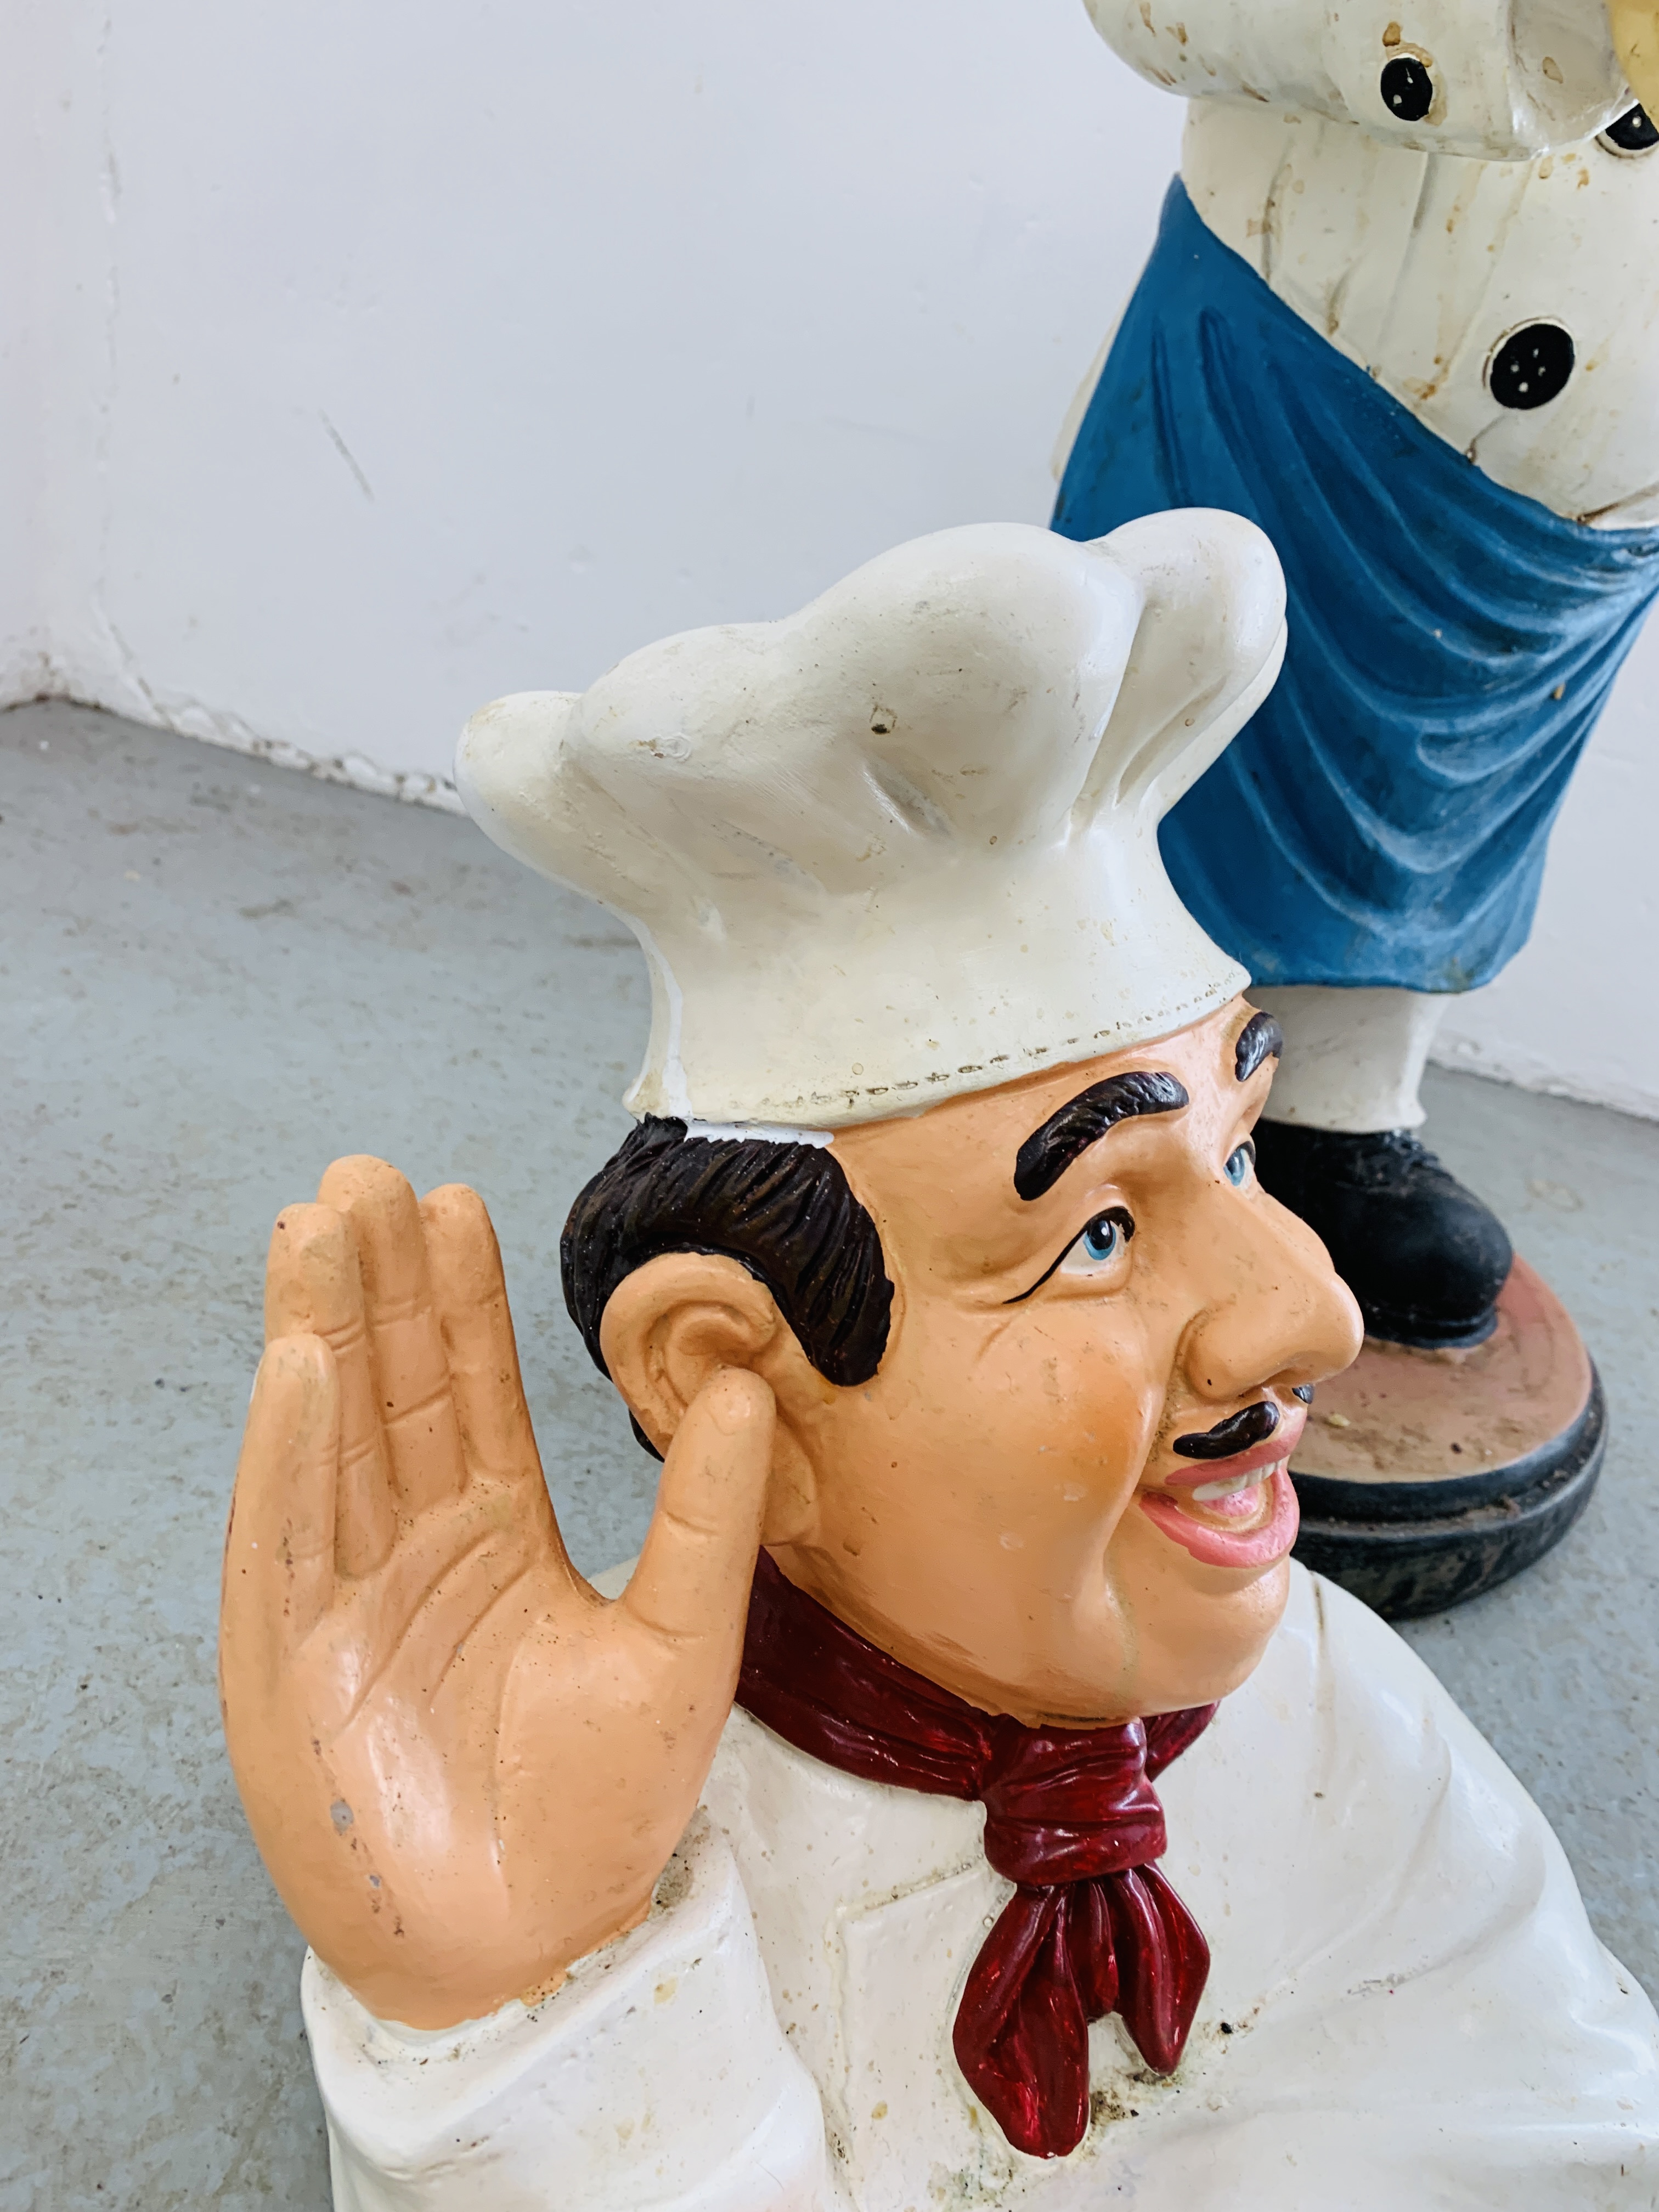 A NOVELTY STANDING "CHEF" FIGURE A/F AND ONE OTHER "CHEF" FIGURE - Image 11 of 12